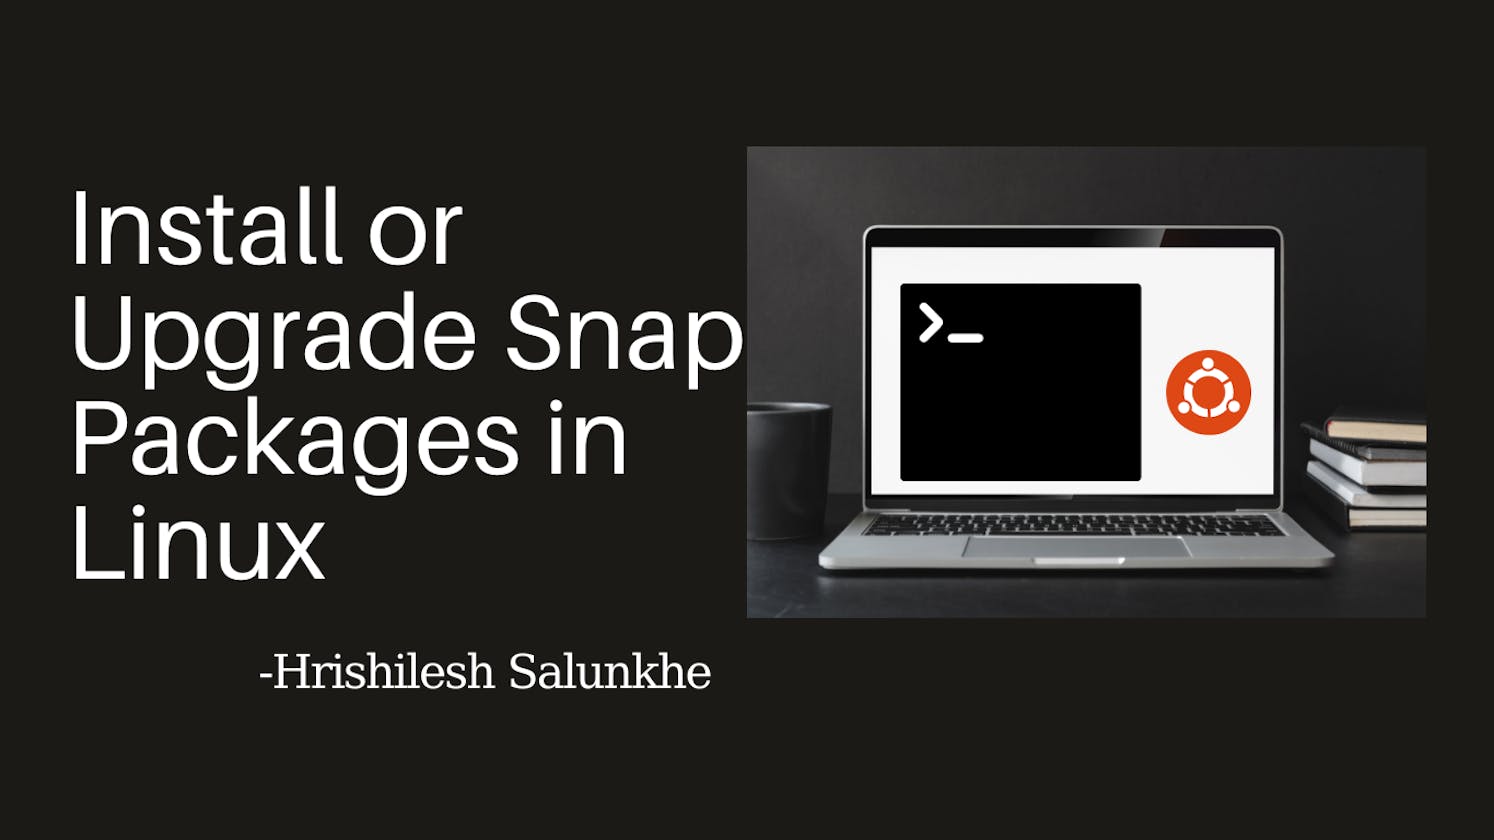 Install or Upgrade Snap Packages in Linux